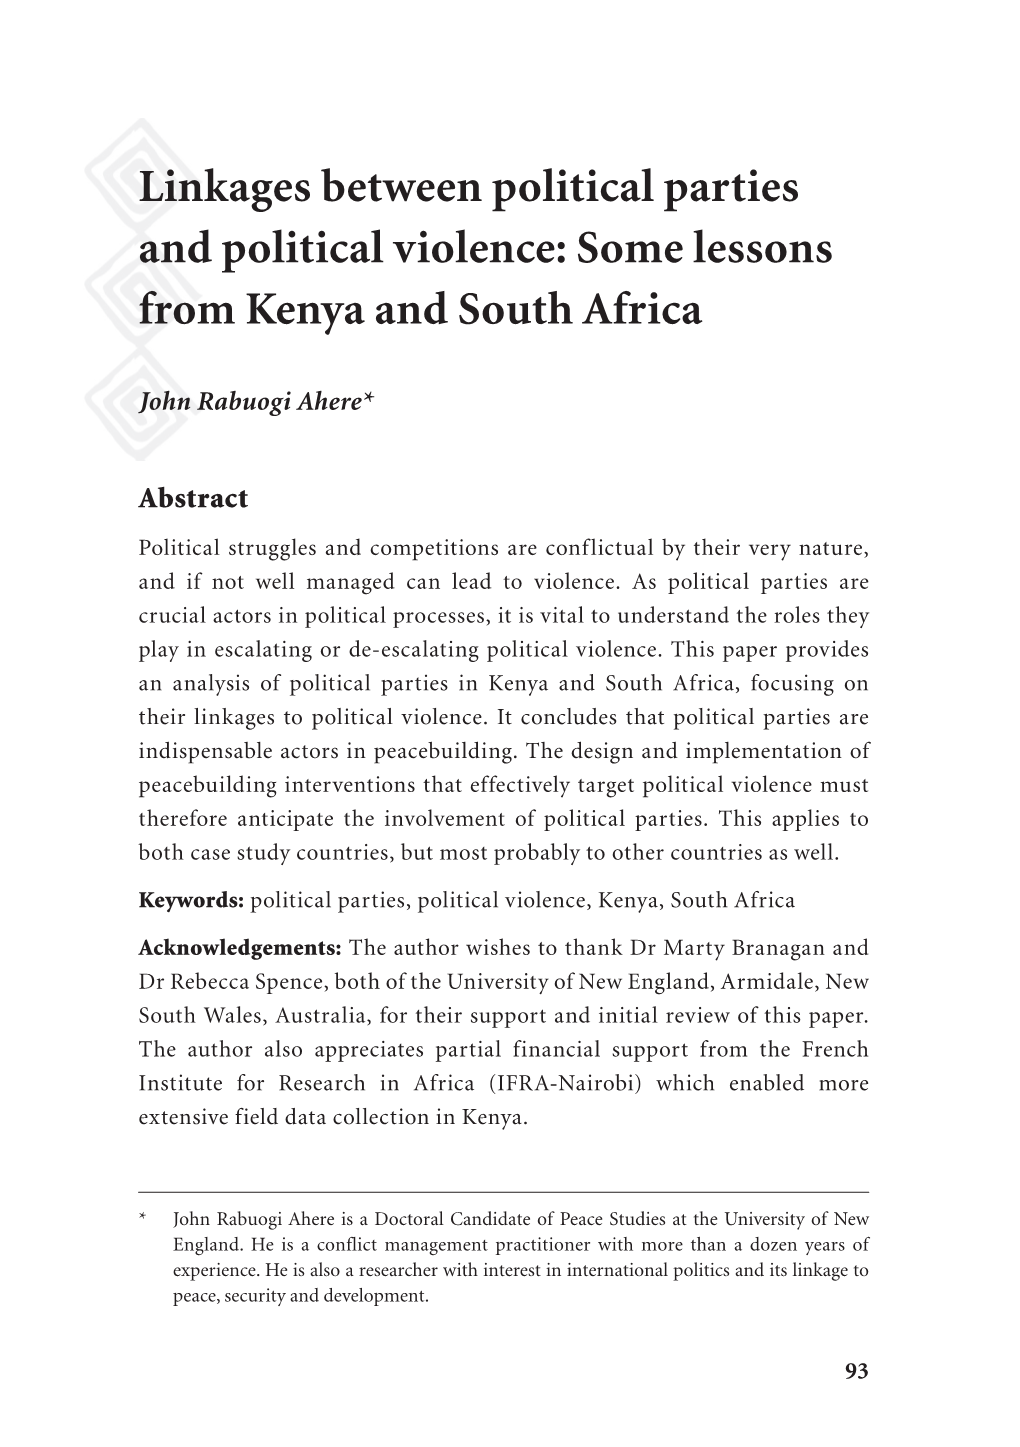 Linkages Between Political Parties and Political Violence: Some Lessons from Kenya and South Africa